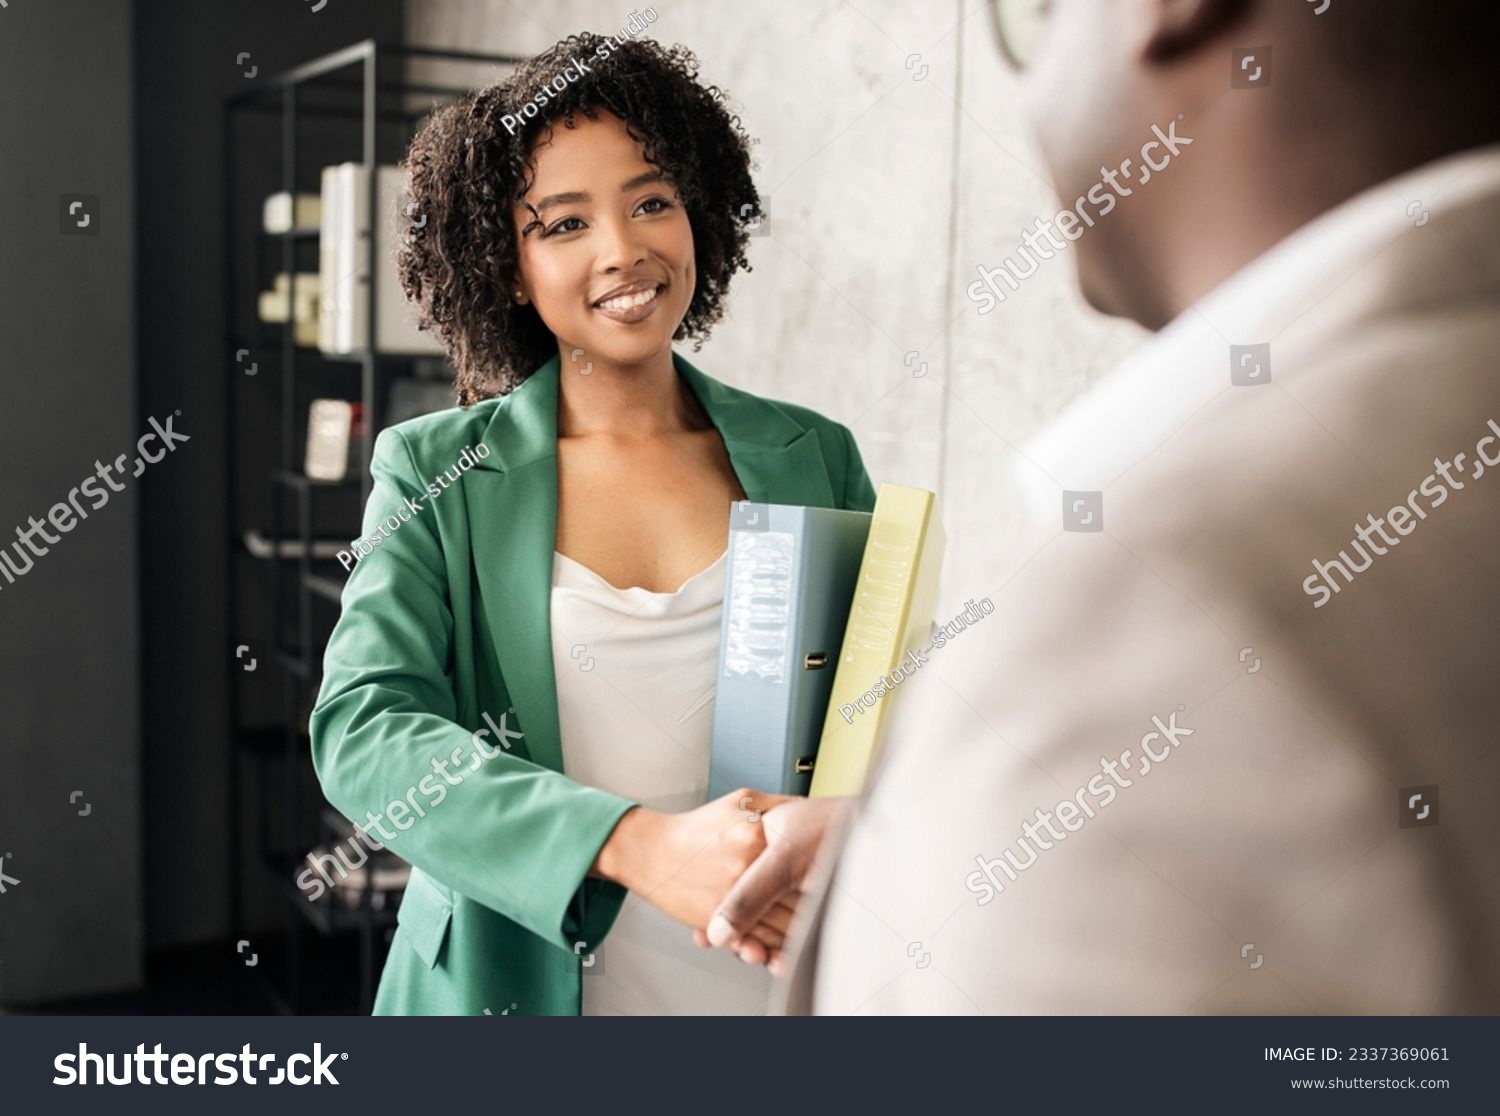 Employment Concept. Smiling Black Manager Woman Handshaking With Man Meeting For Job Interview Standing In Modern Office, Selective Focus. Business Partnership And Employee Recruitment #2337369061